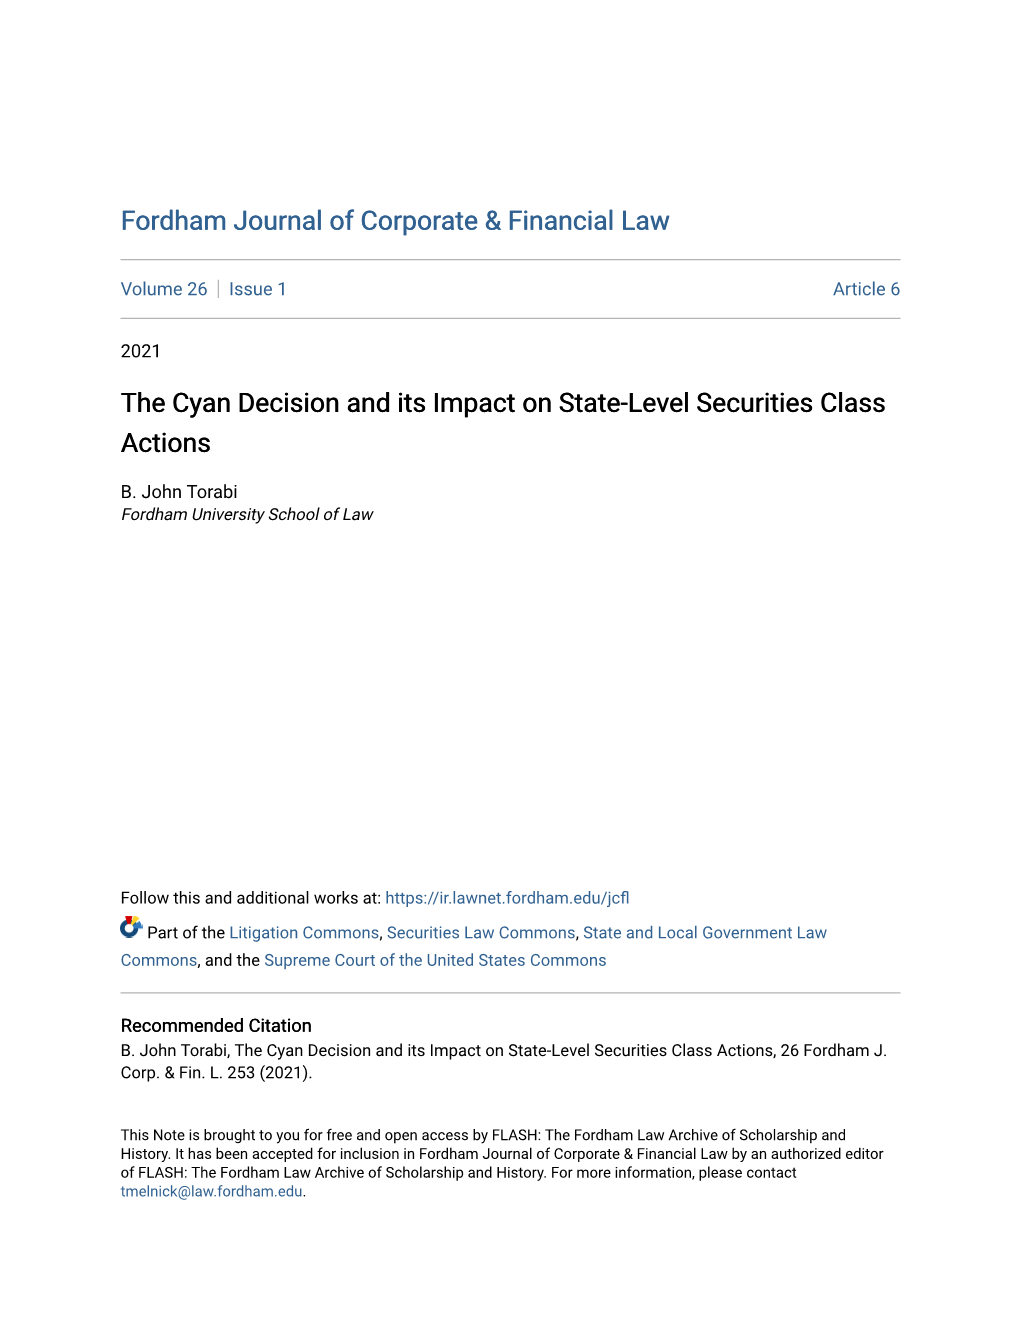 The Cyan Decision and Its Impact on State-Level Securities Class Actions